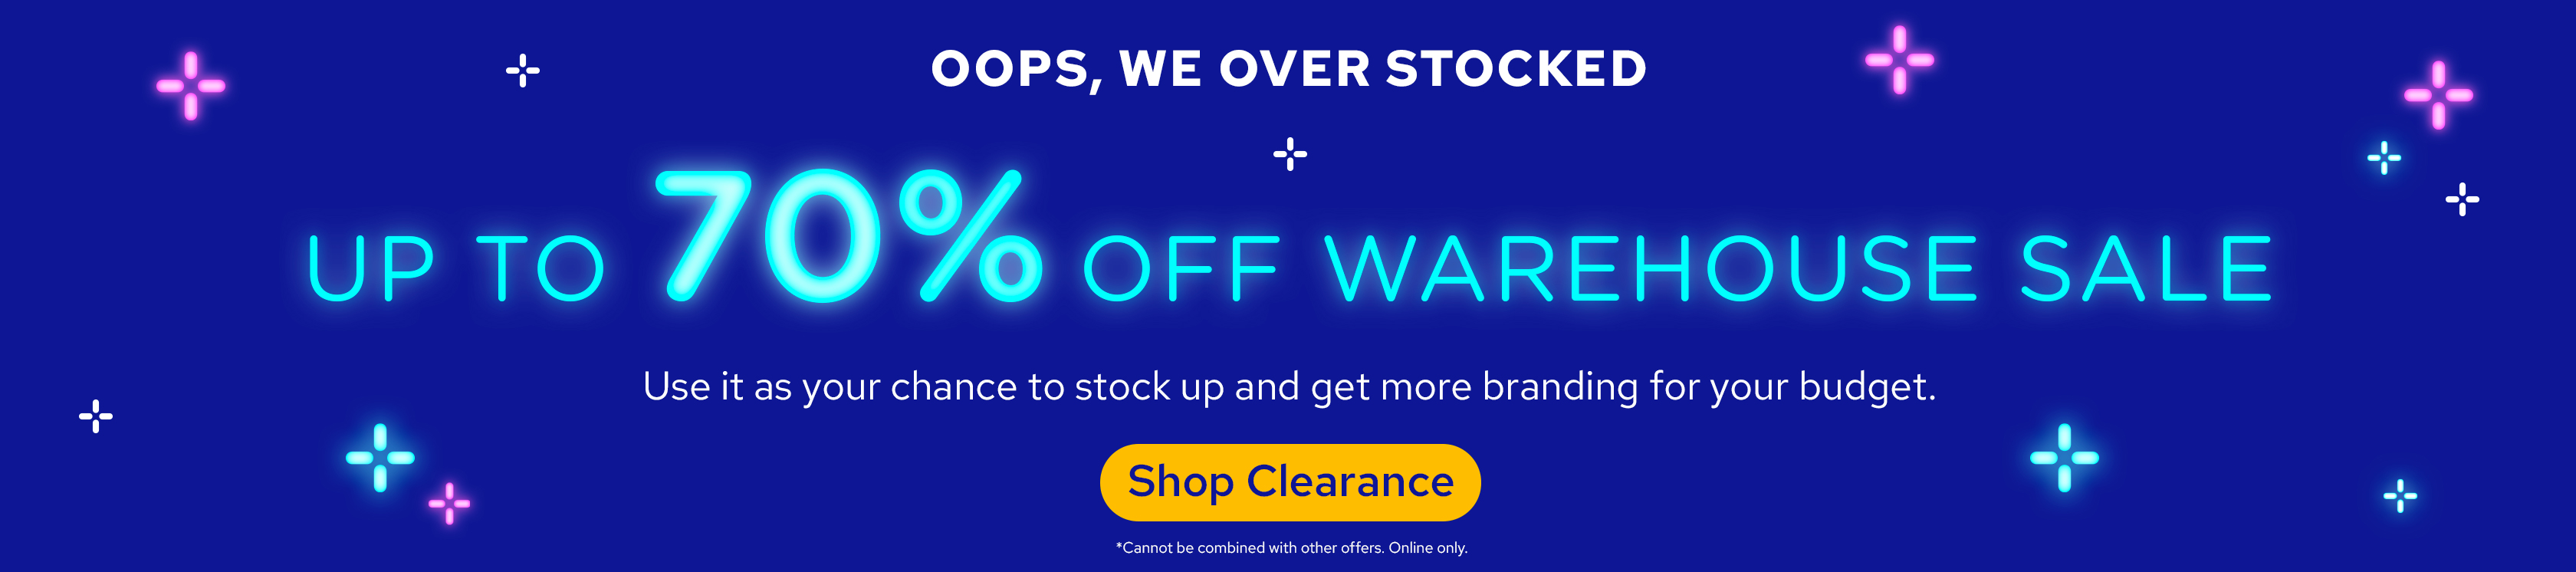 Oops, we over stocked | Up to 70% off Warehouse Sale | Use it as your chance to stock up and get more branding for your budget | Shop Clearance